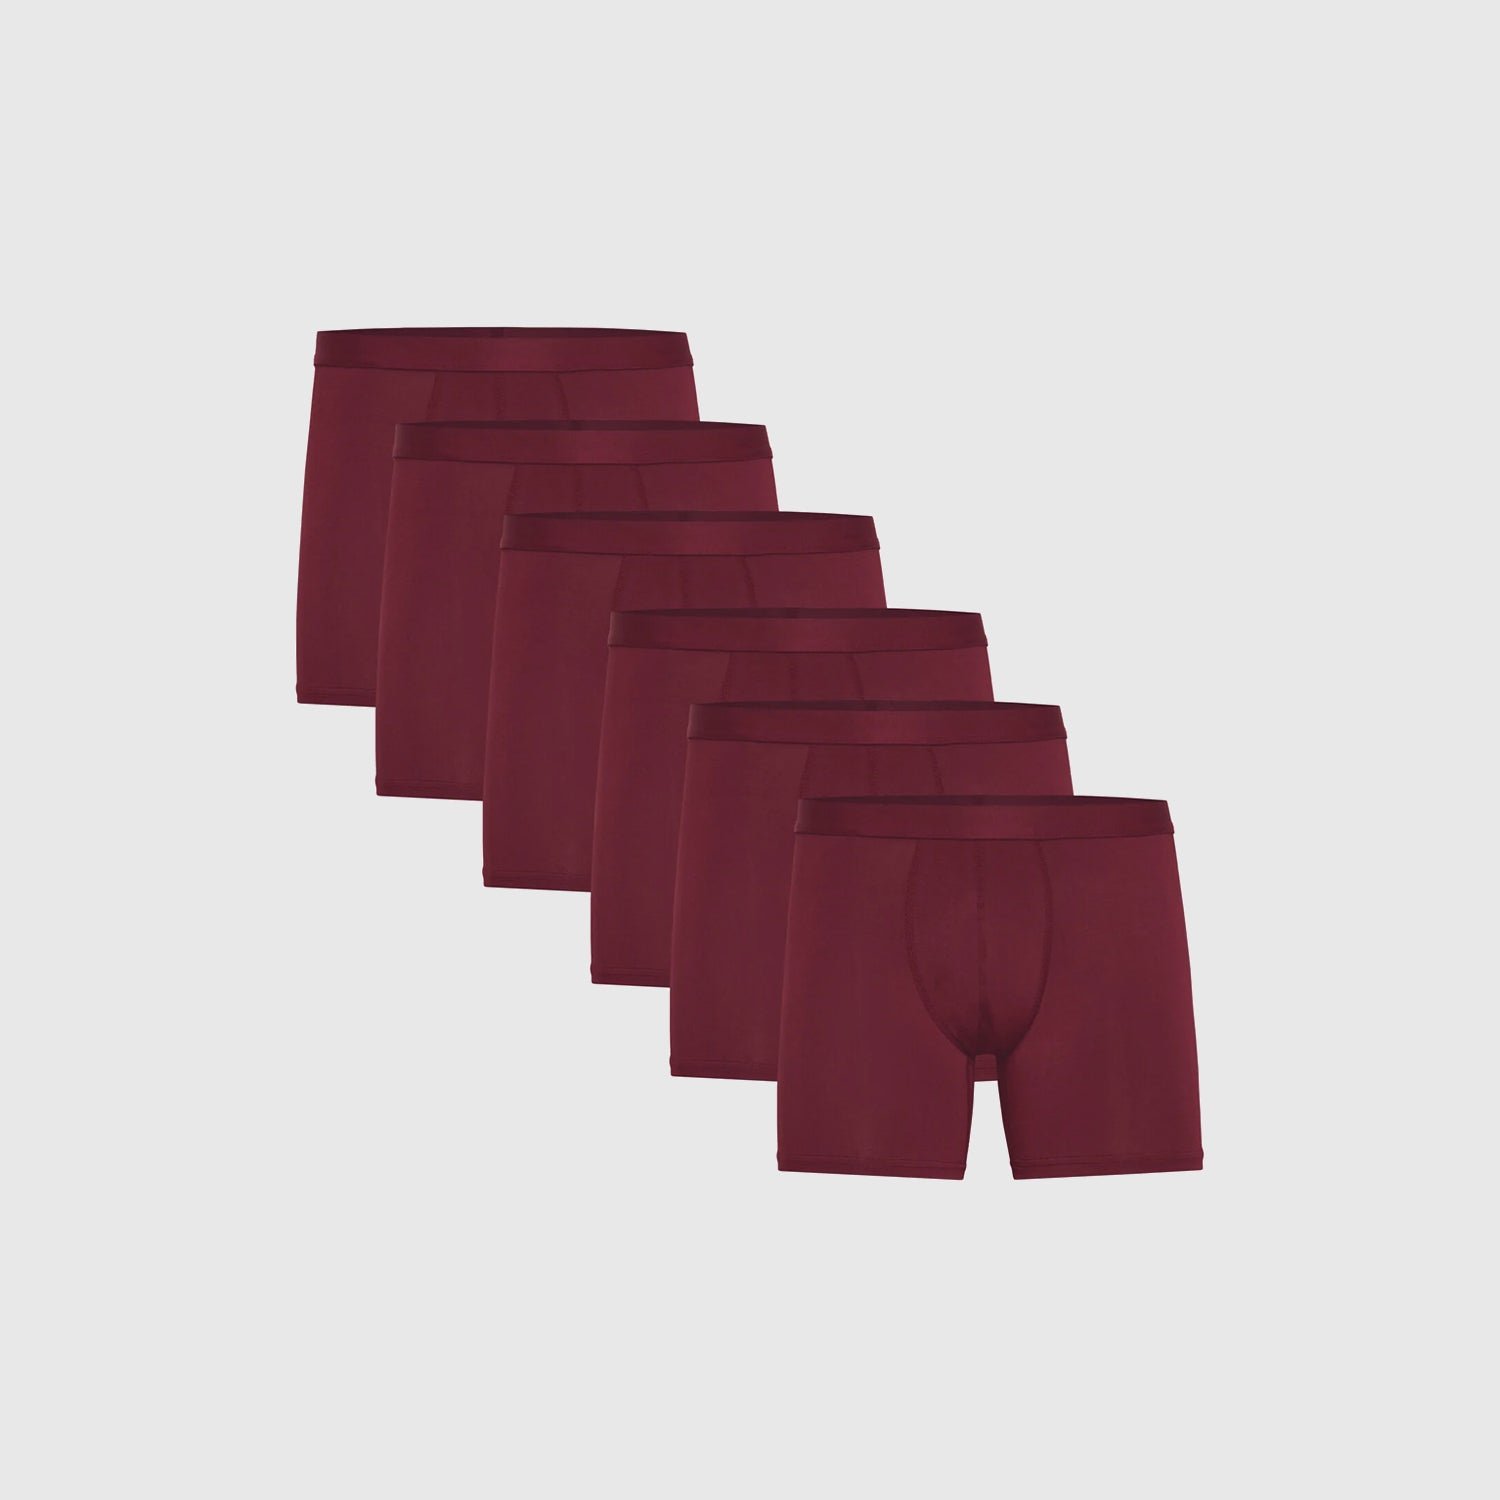 The Burgundy Brief 6-Pack